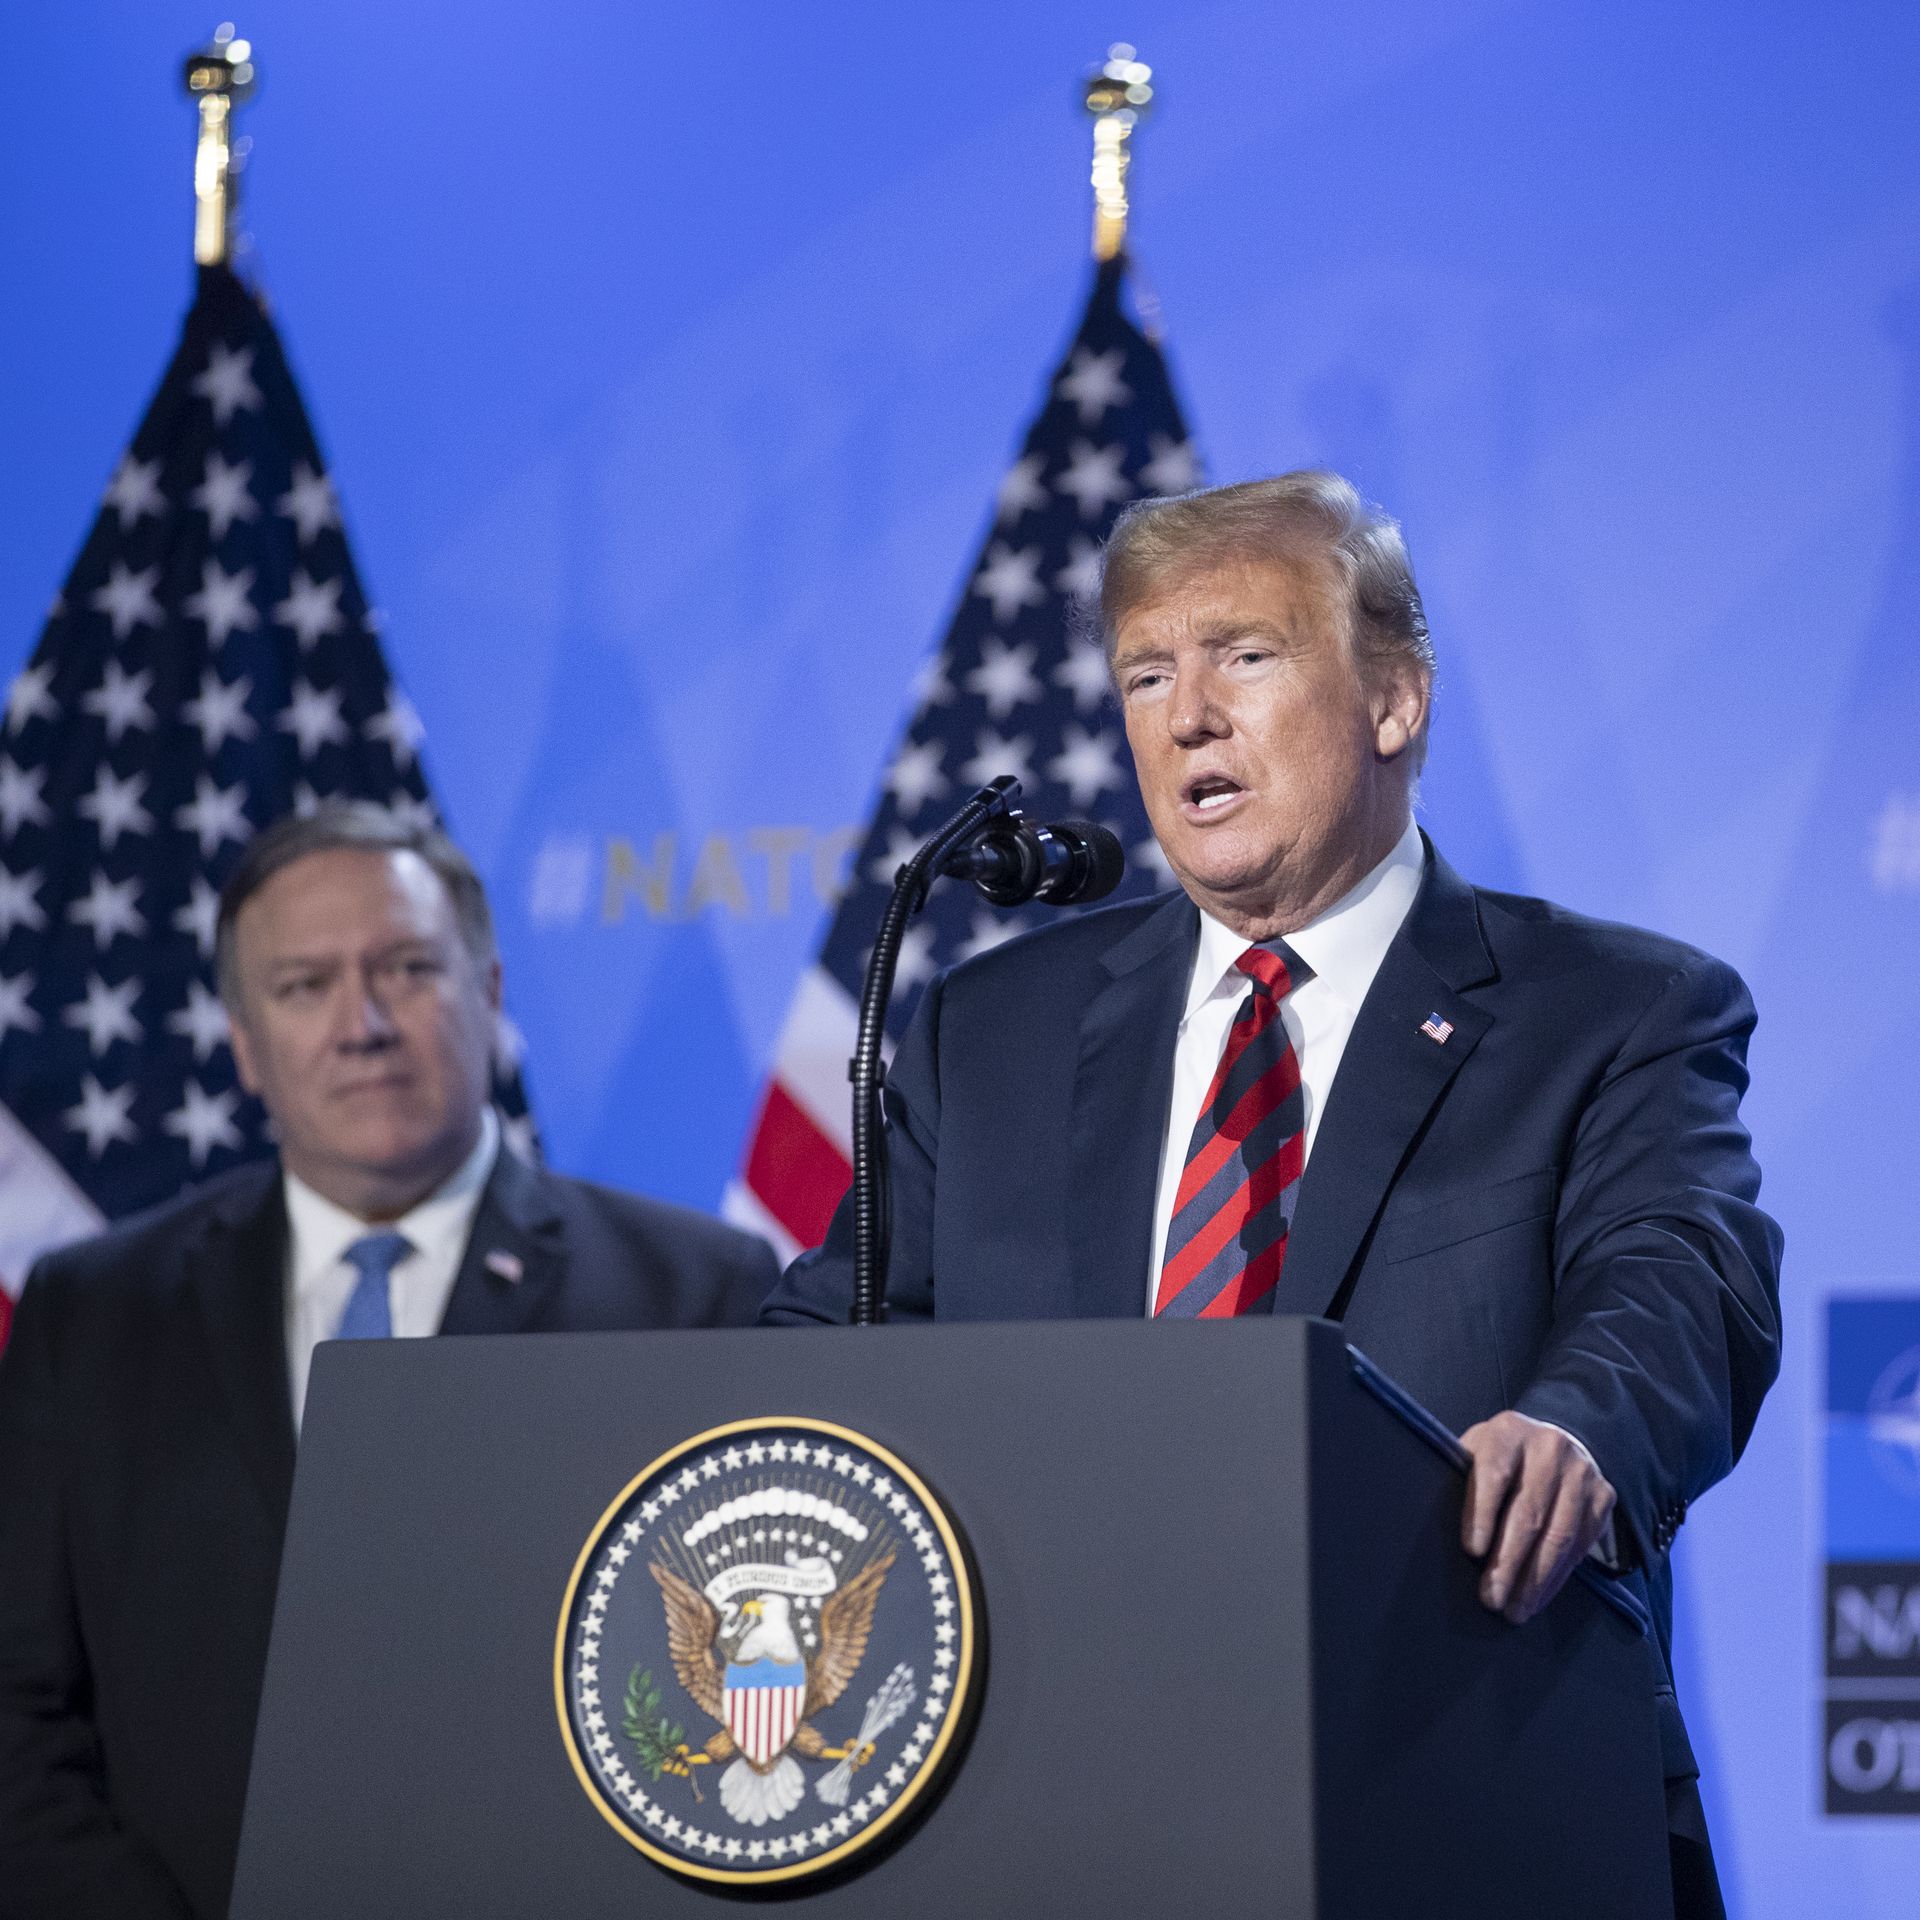 President Donald Trump speaks besides U.S. Secretary of State Mike Pompeo during a news conference at the 2018 NATO Summit.